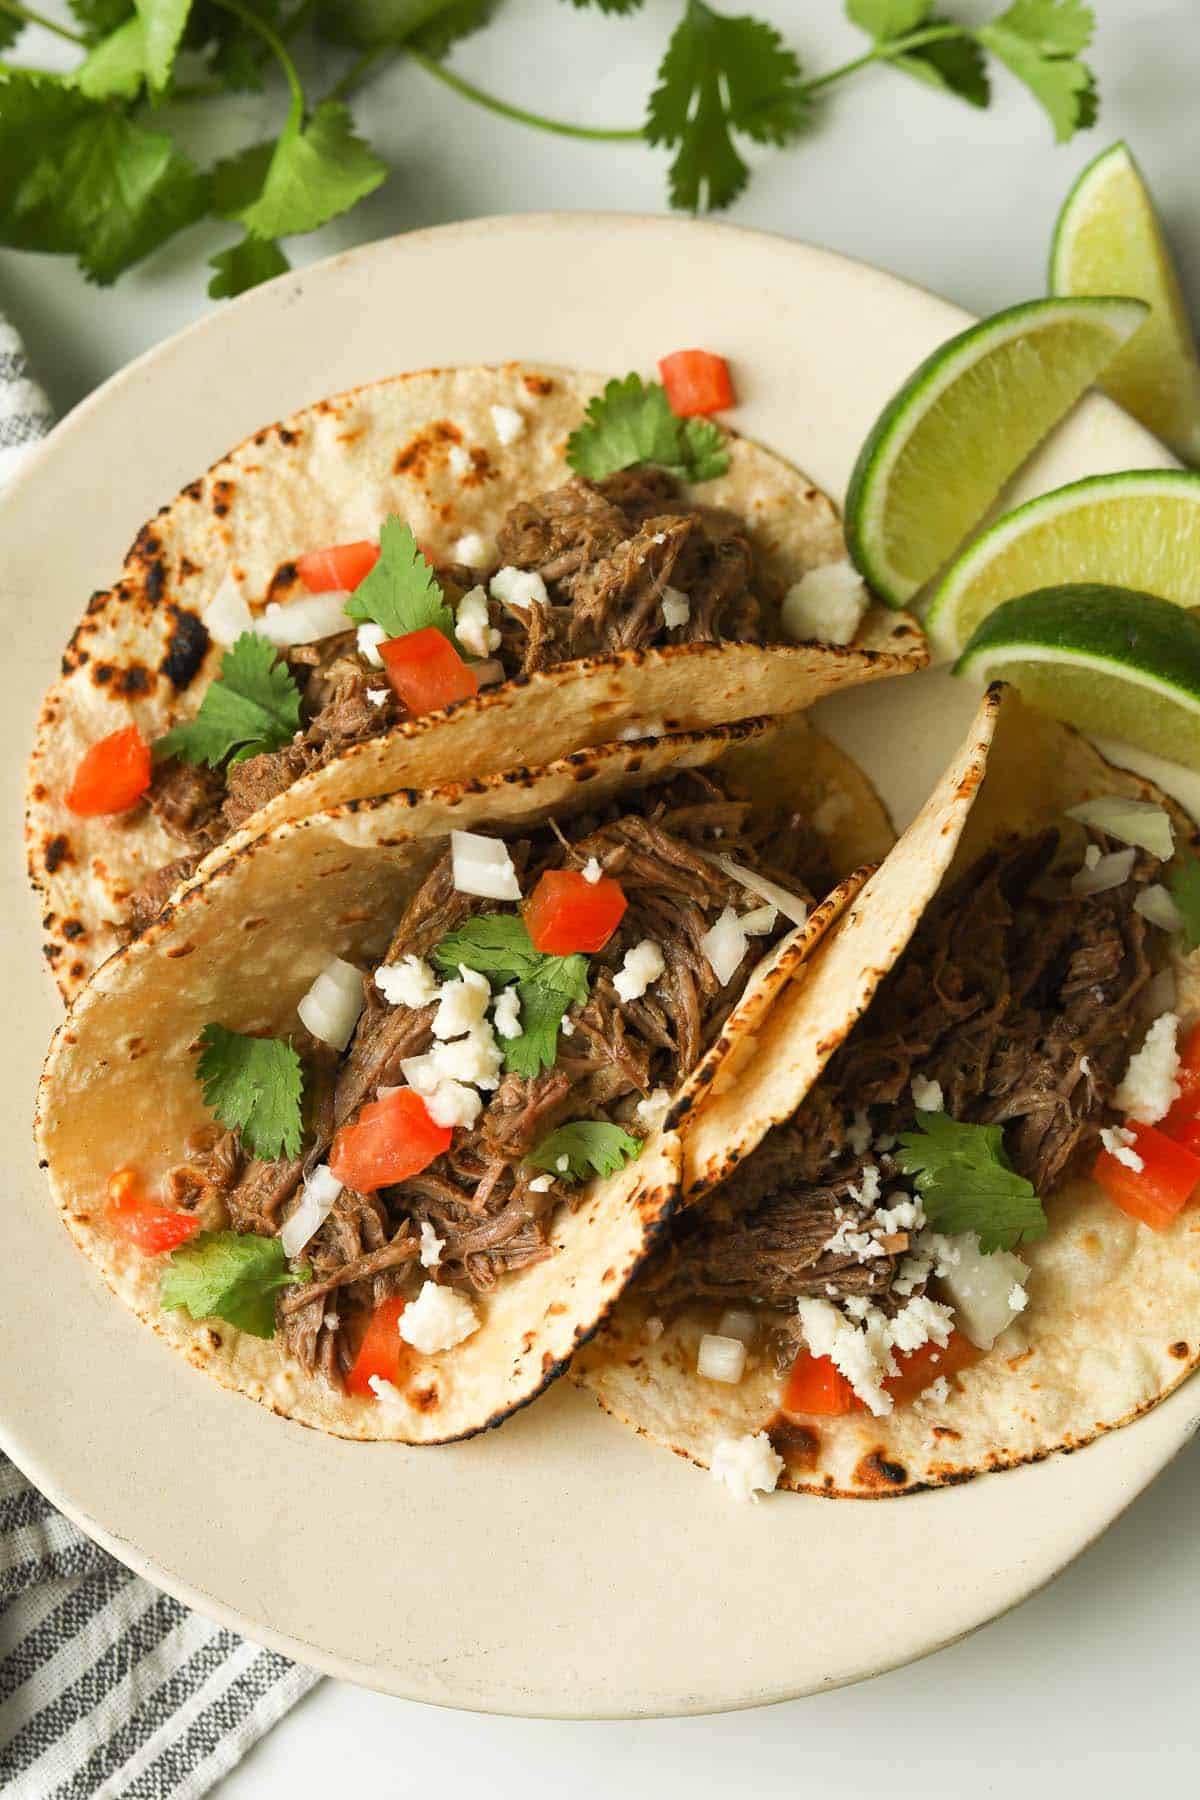 Shredded beef tacos garnished with cheese, onions, cilantro and tomatoes.